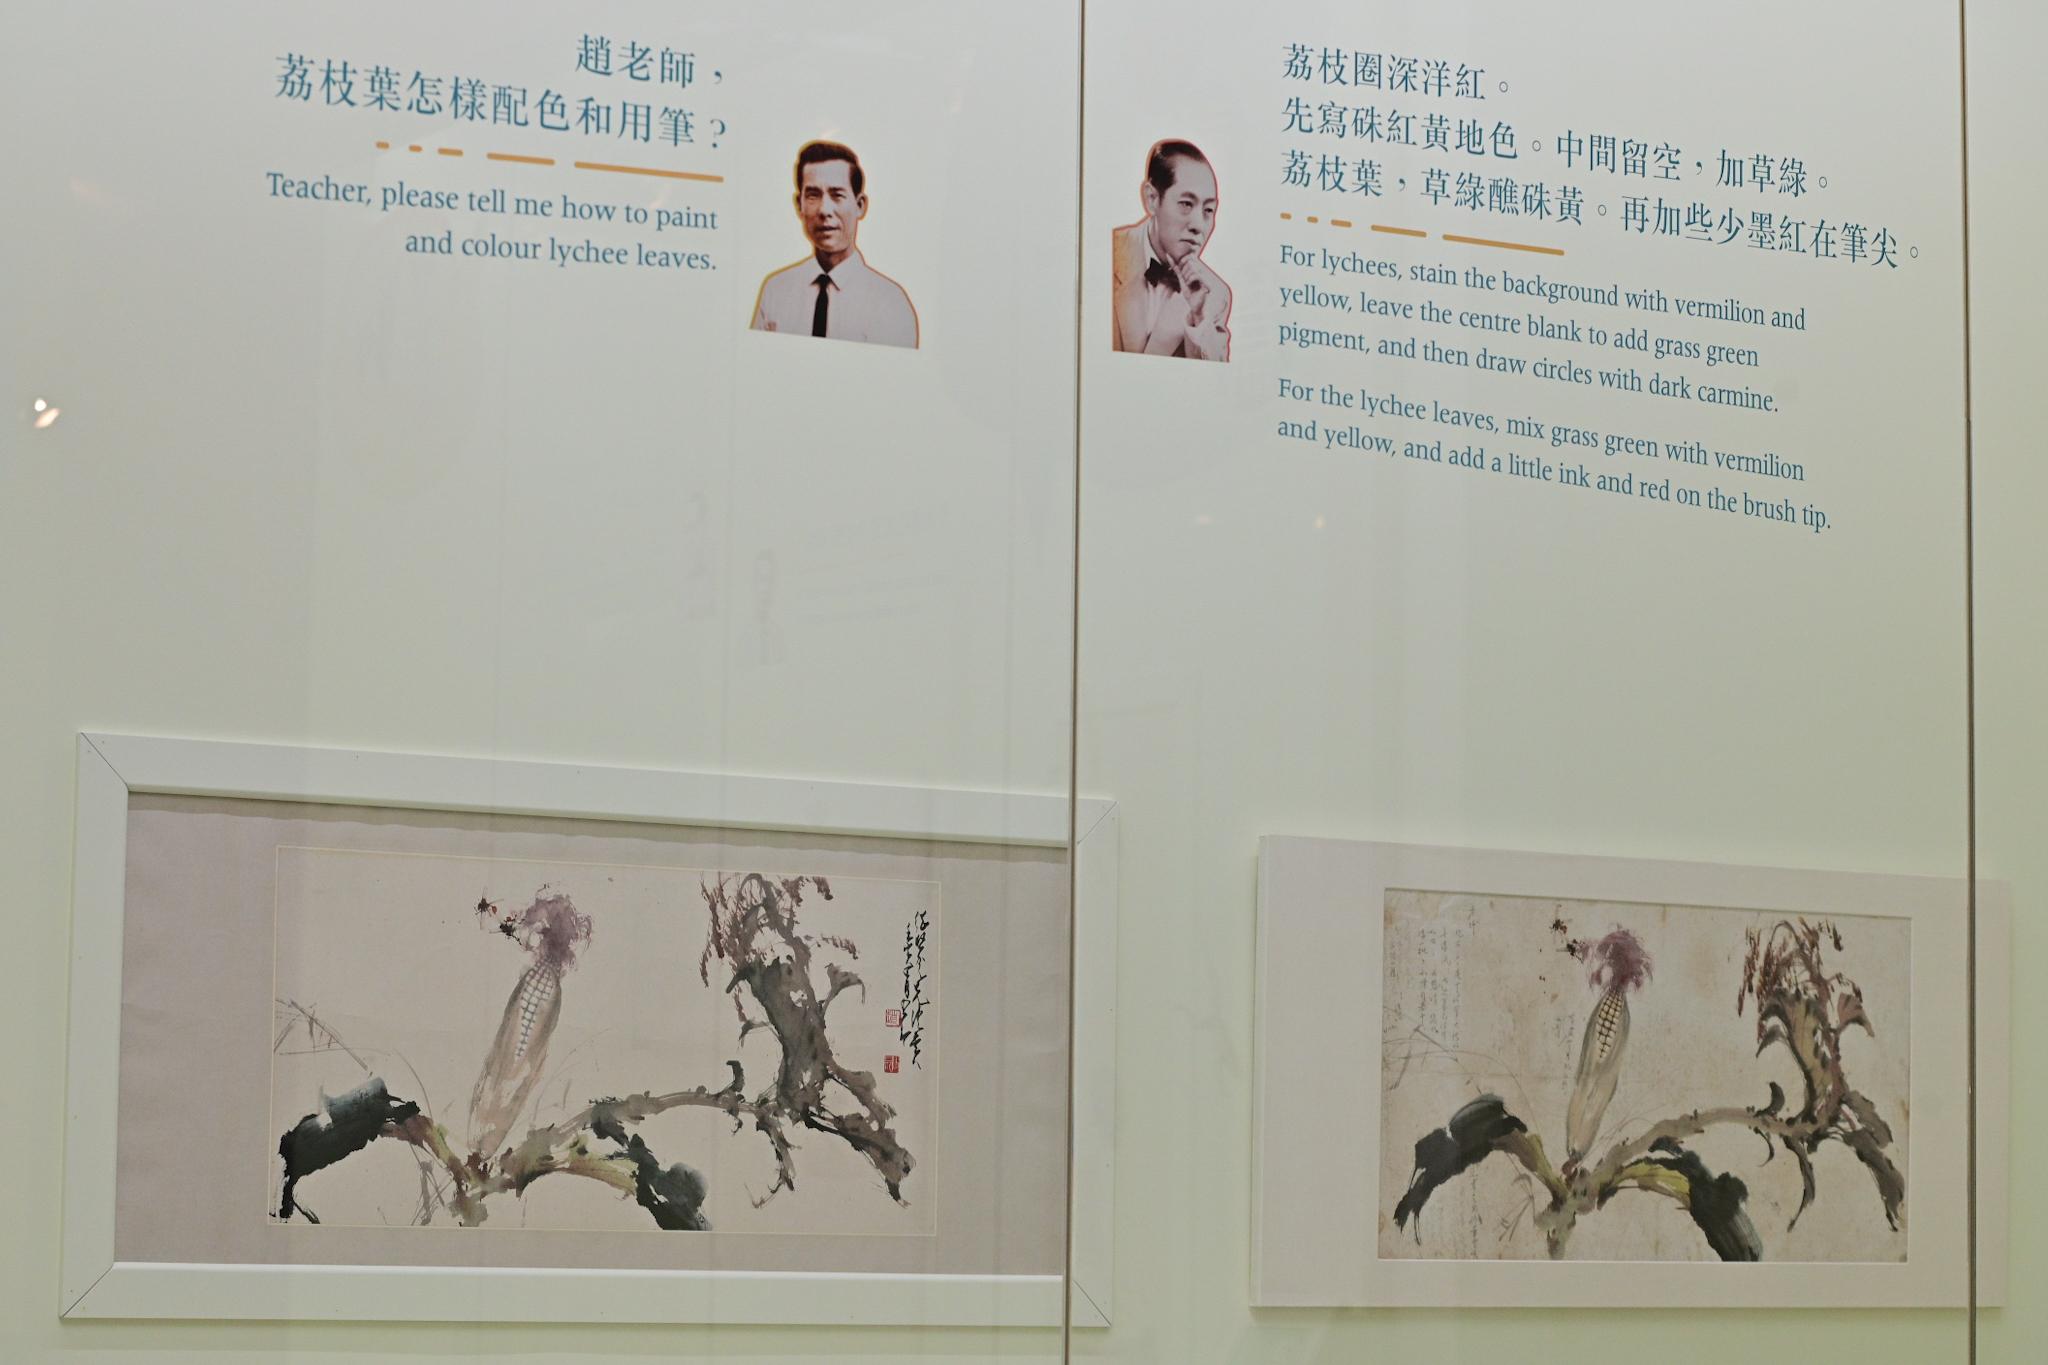 The exhibition "From a Distance: Art Dialogues between Chao Shao-an and Chin Kee" will be open to the public from tomorrow (September 21) at the Hong Kong Heritage Museum. Forty-five paintings including assignments by Chin Kee, who was trained under Chao Shao-an through correspondence in the 1950s and 1960s, and paintings by Chao will be showcased, documenting the teaching approach of Chao.